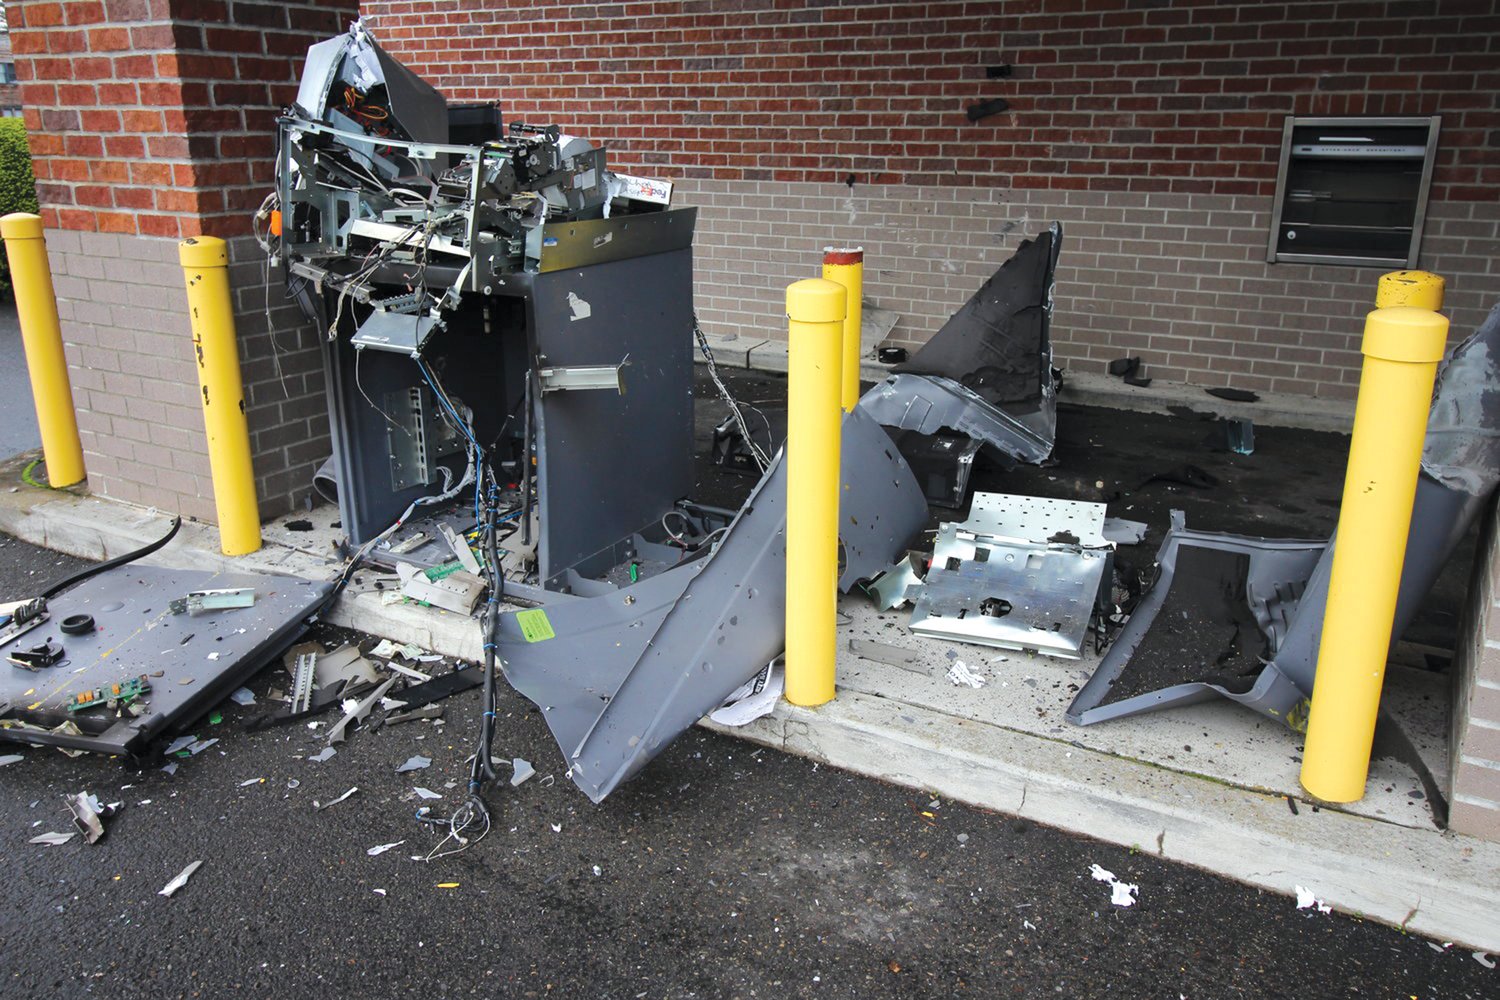 The exploded ATM is pictured in this photograph provided by the Centralia Police Department.